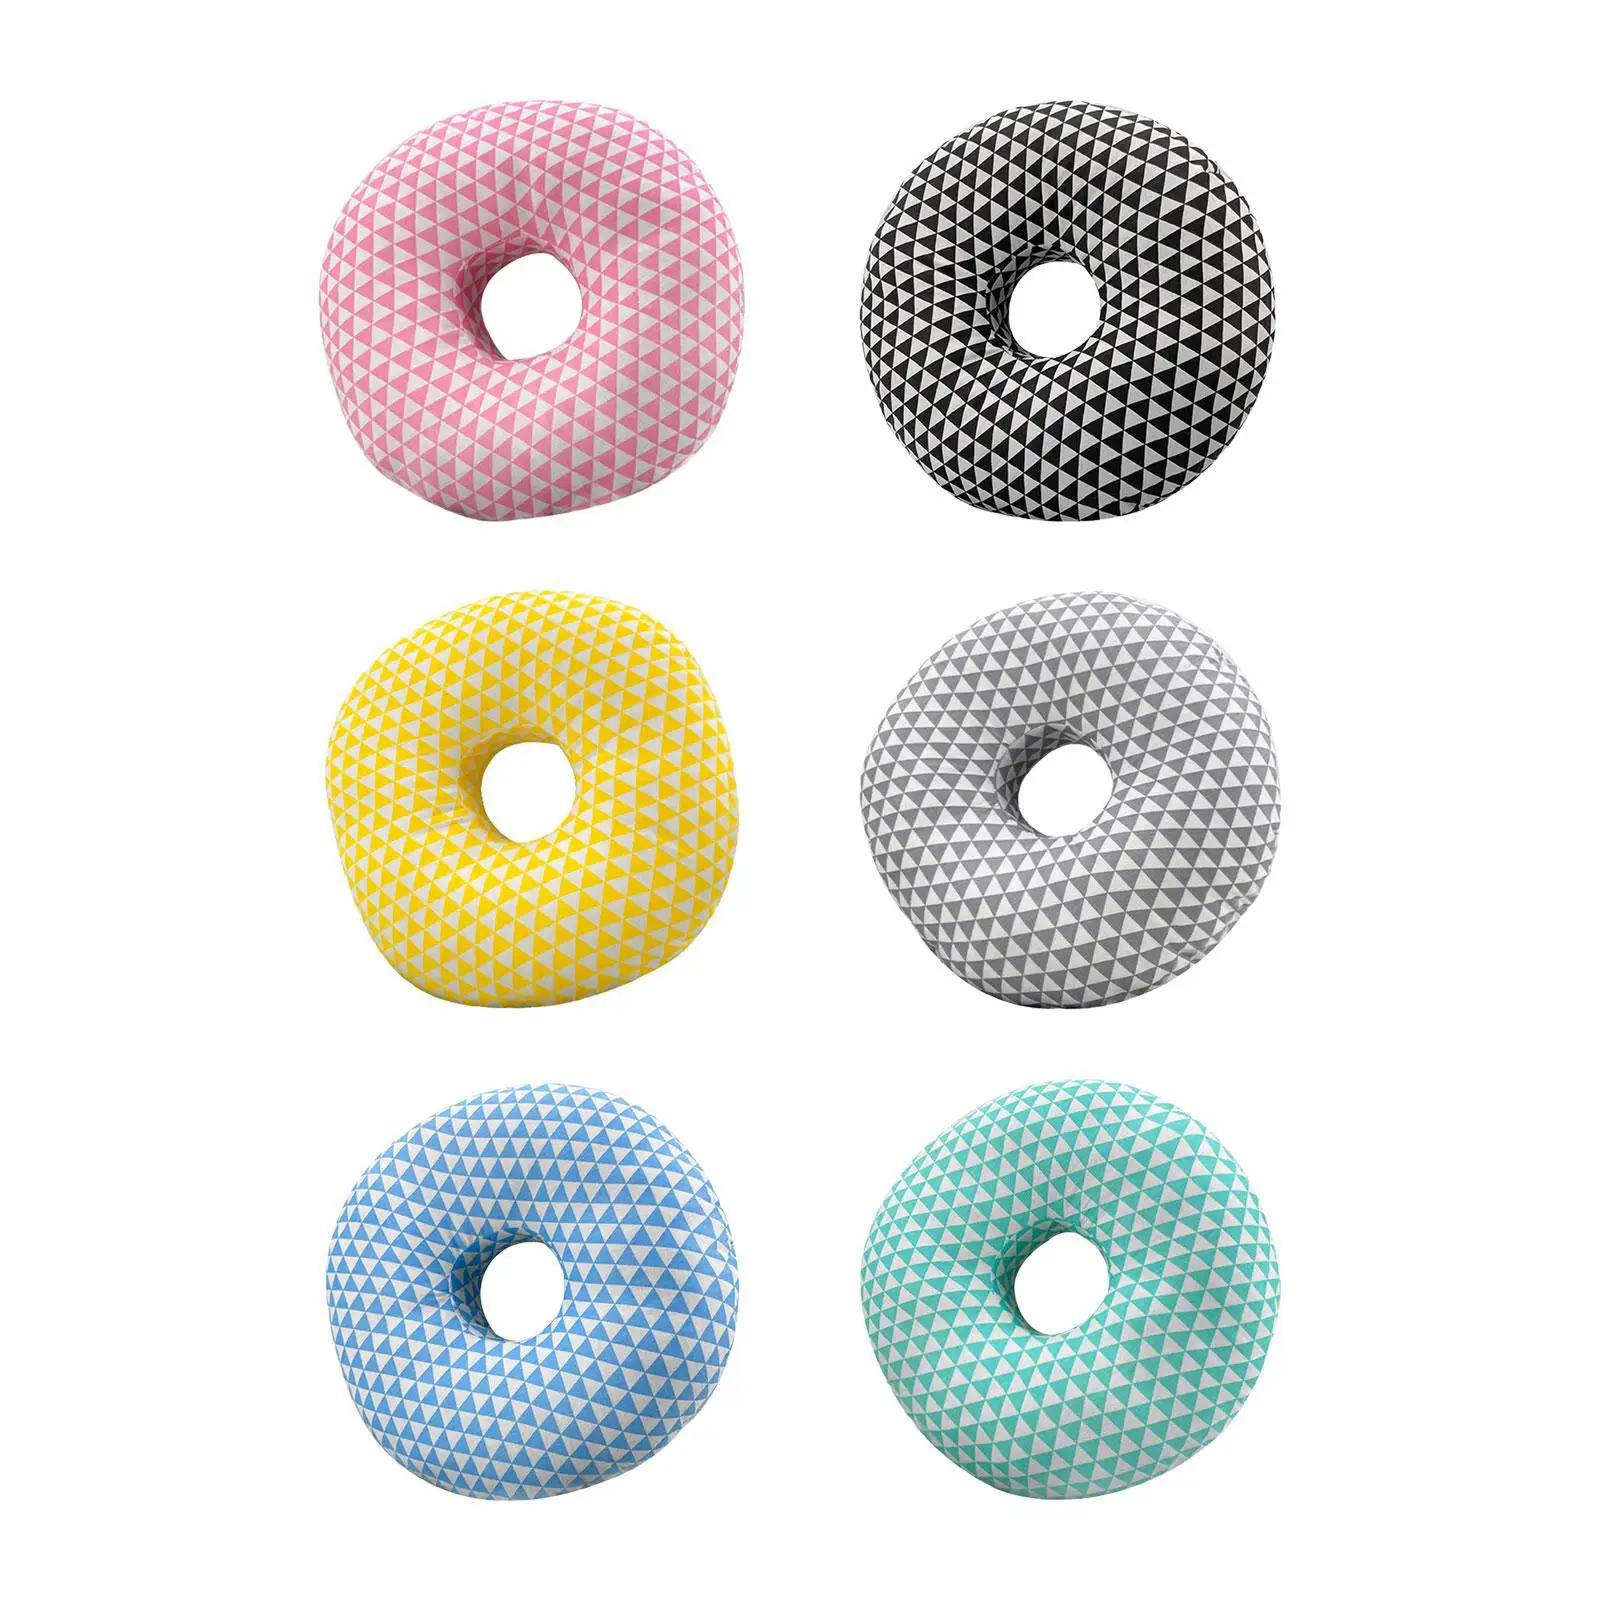 Donut Pillow Protector Sleeping Pillow Perforated Comfortable O Shaped Side Sleeping Pillow Ear Pillow for Side Sleeping